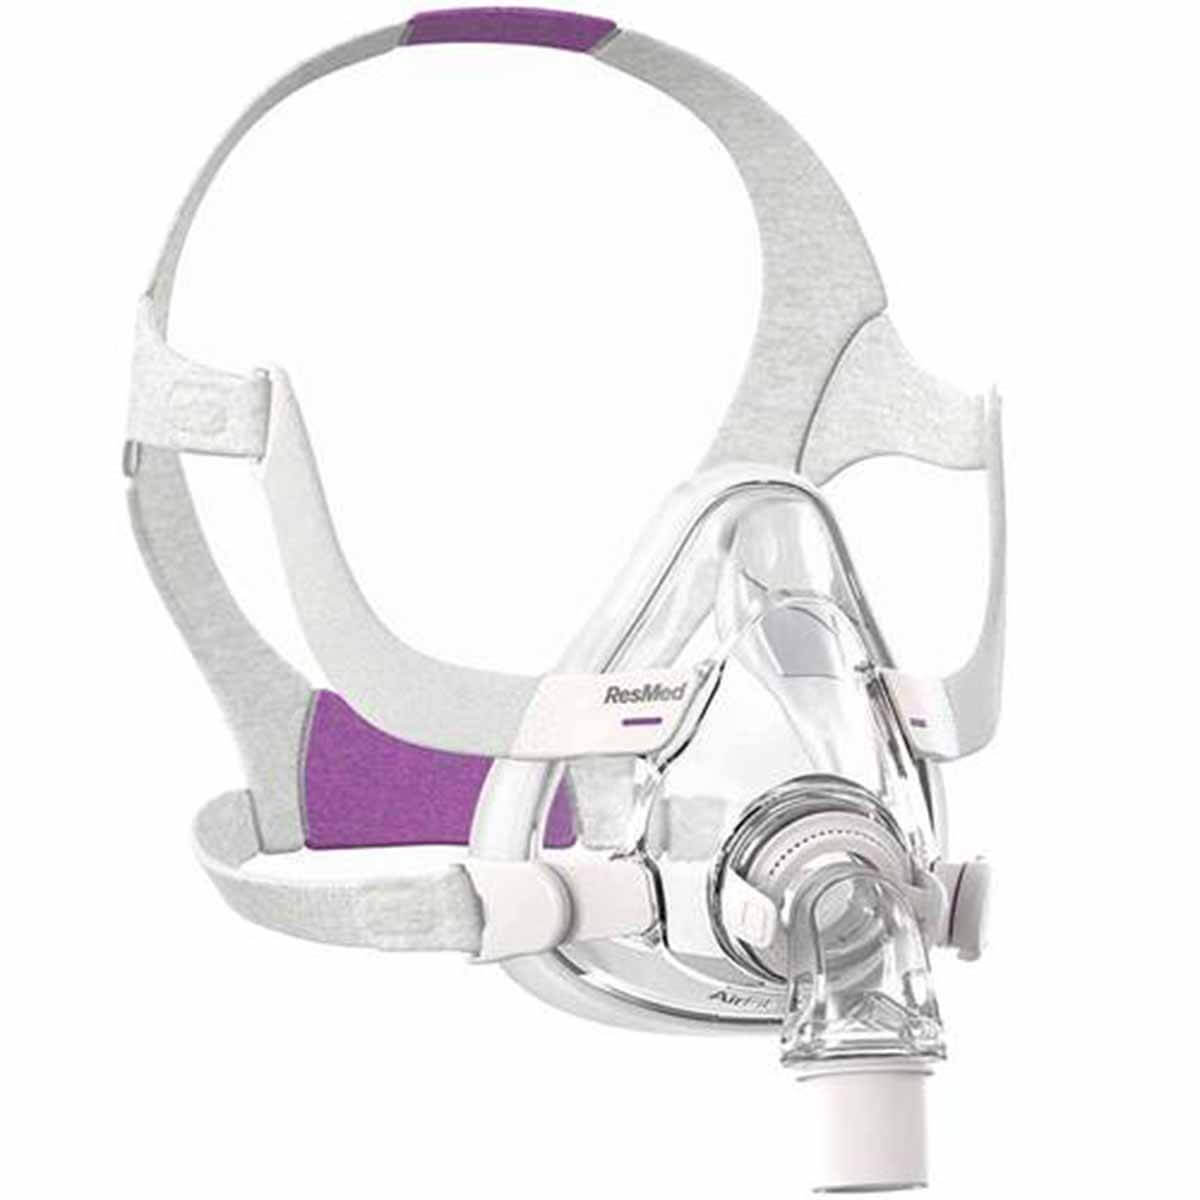 ResMed AirTouch F20 For Her Full Face CPAP Mask